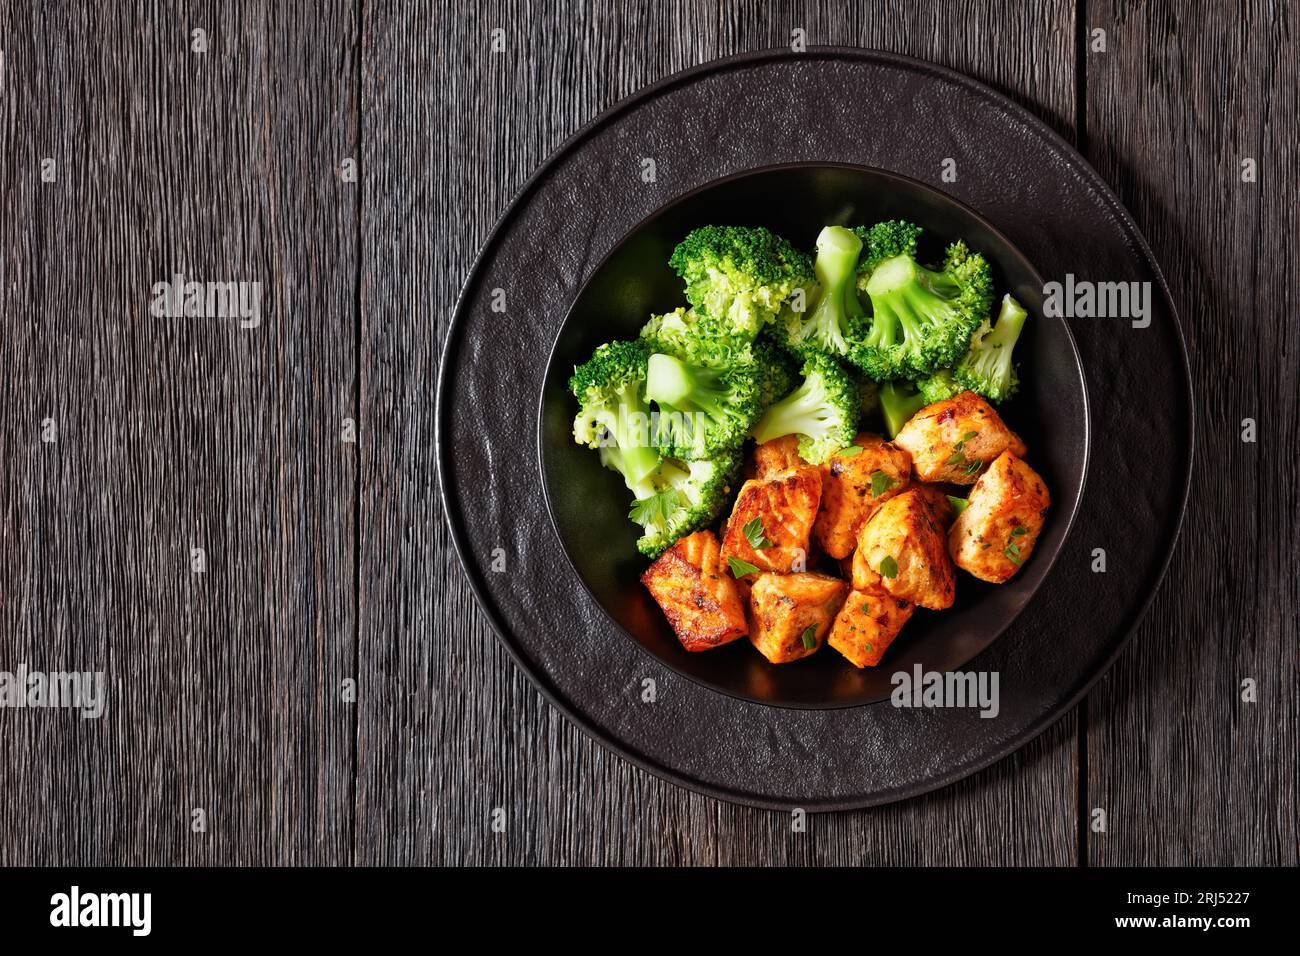 baked salmon chunks with cooked broccoli florets in black bowl on dark wooden table with sriracha mayo sauce, horizontal view from above, copy space Stock Photo